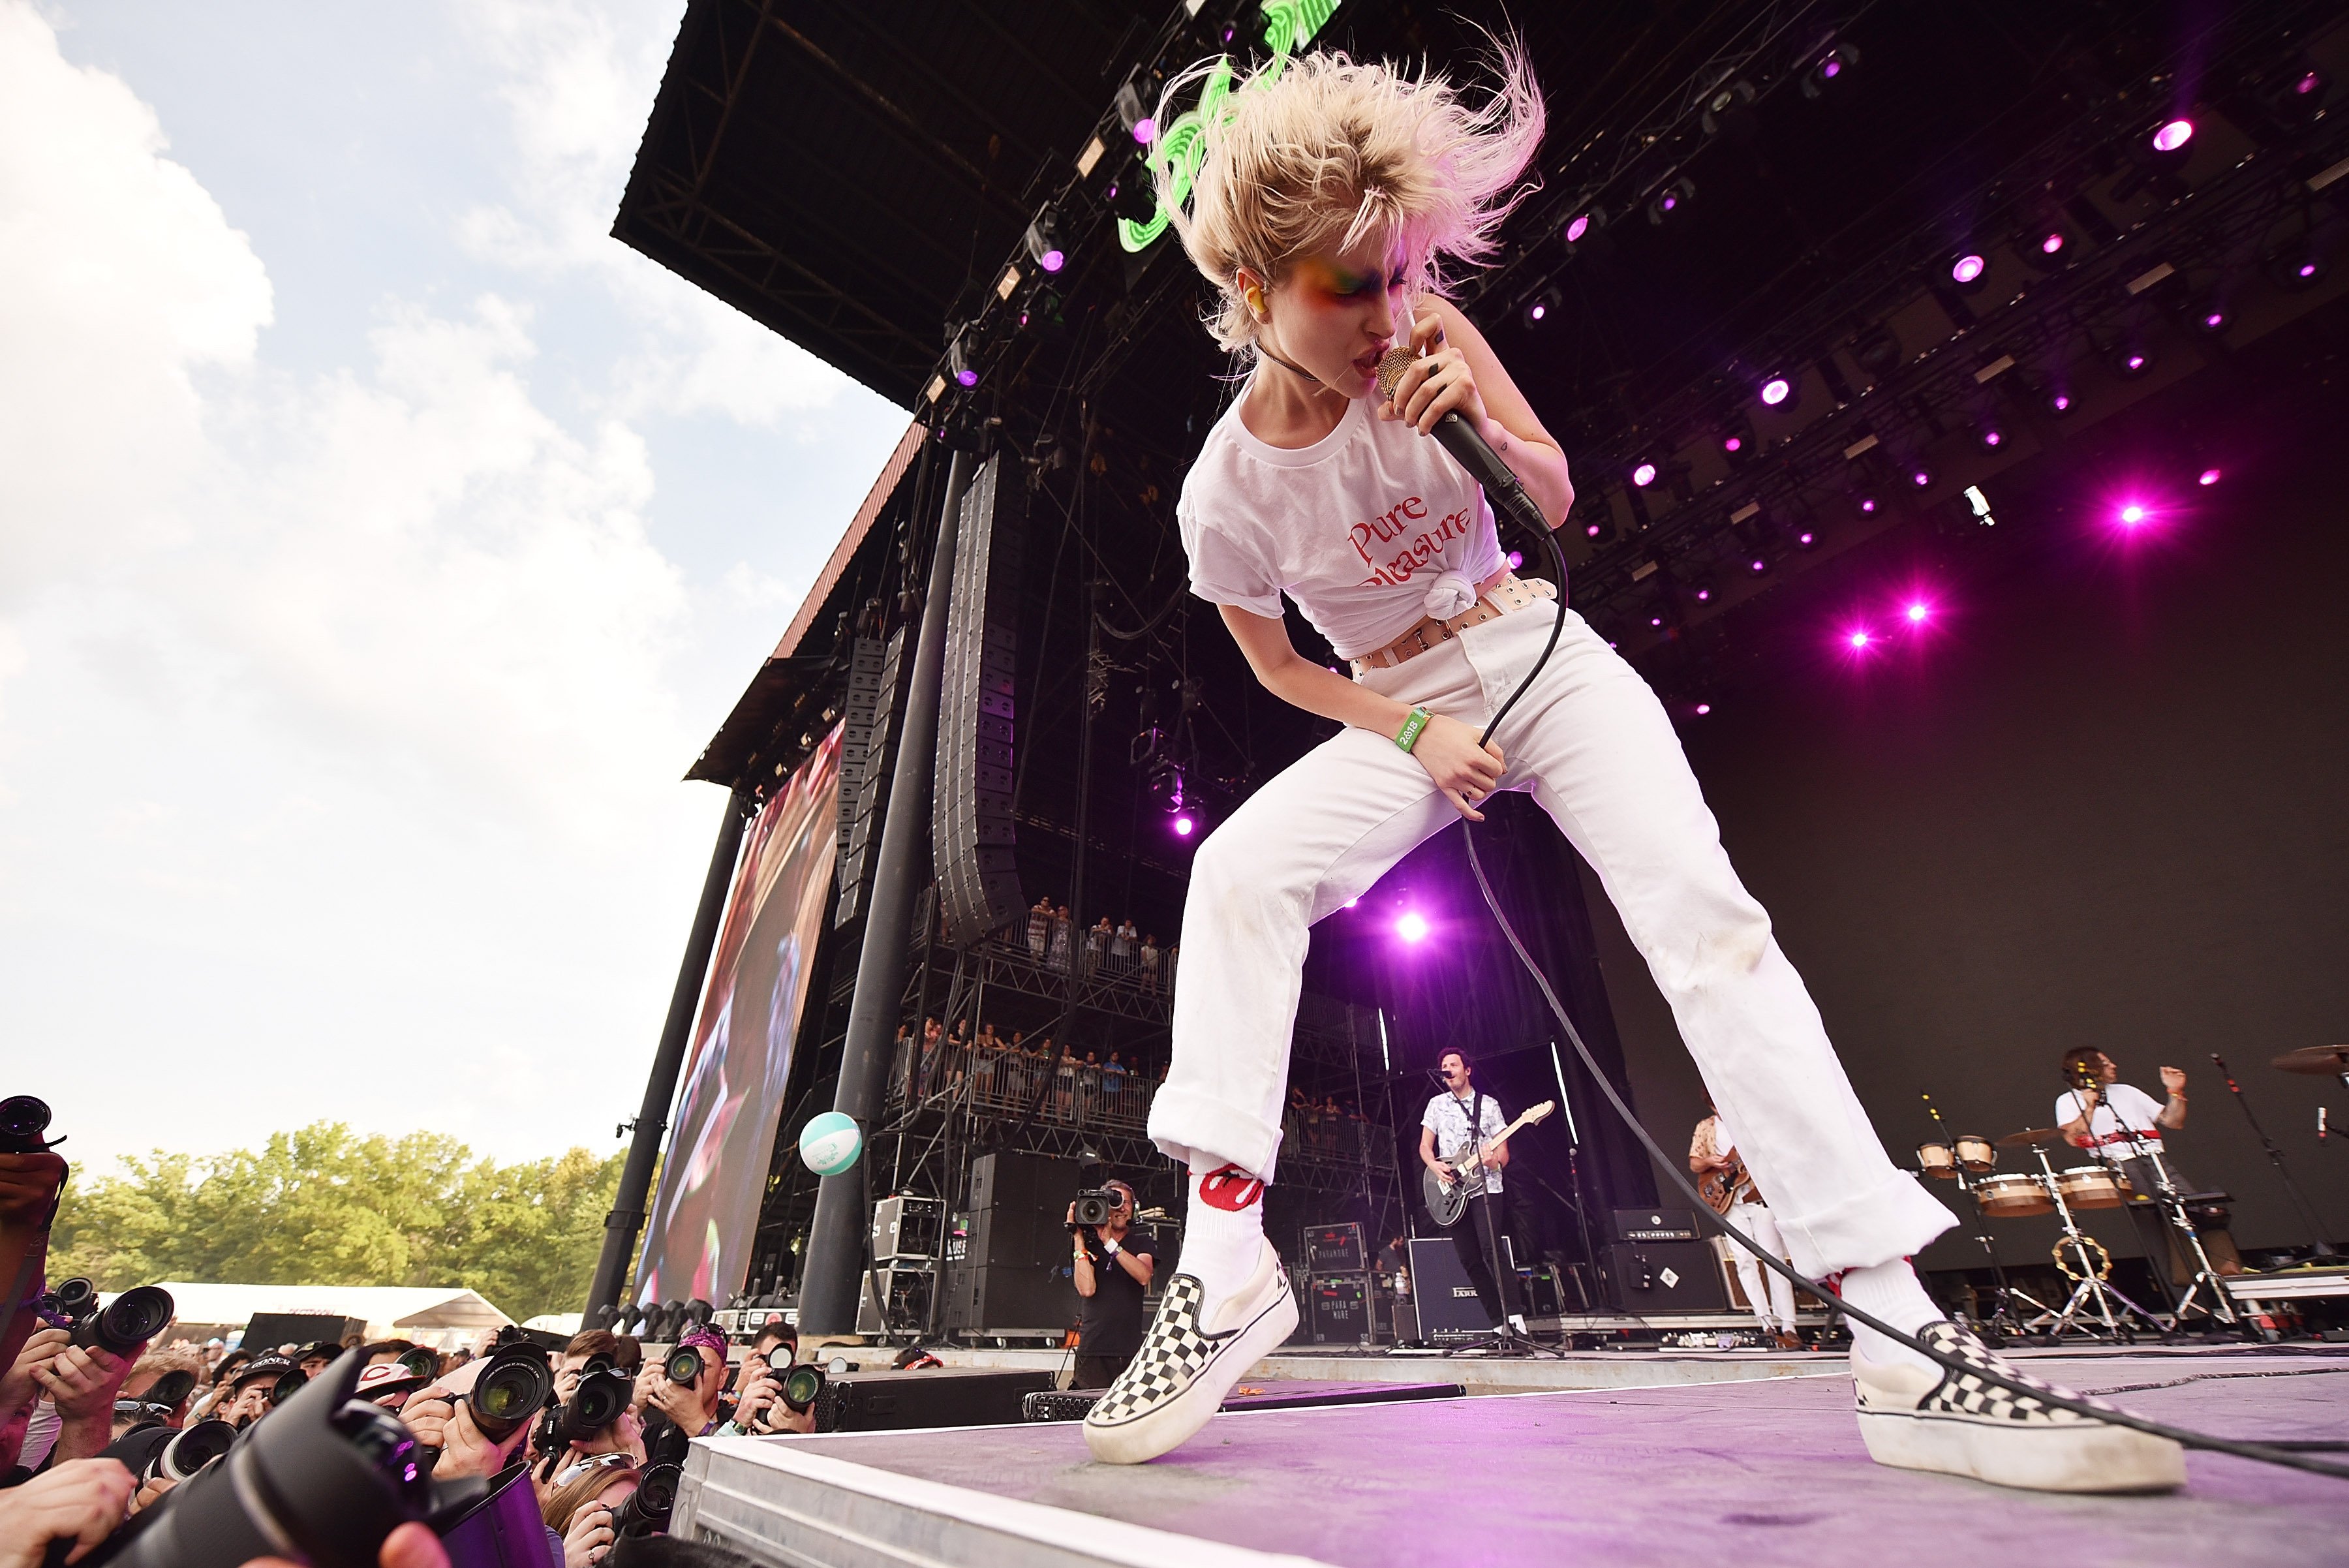 Hayley Williams of Paramore performs live on stage